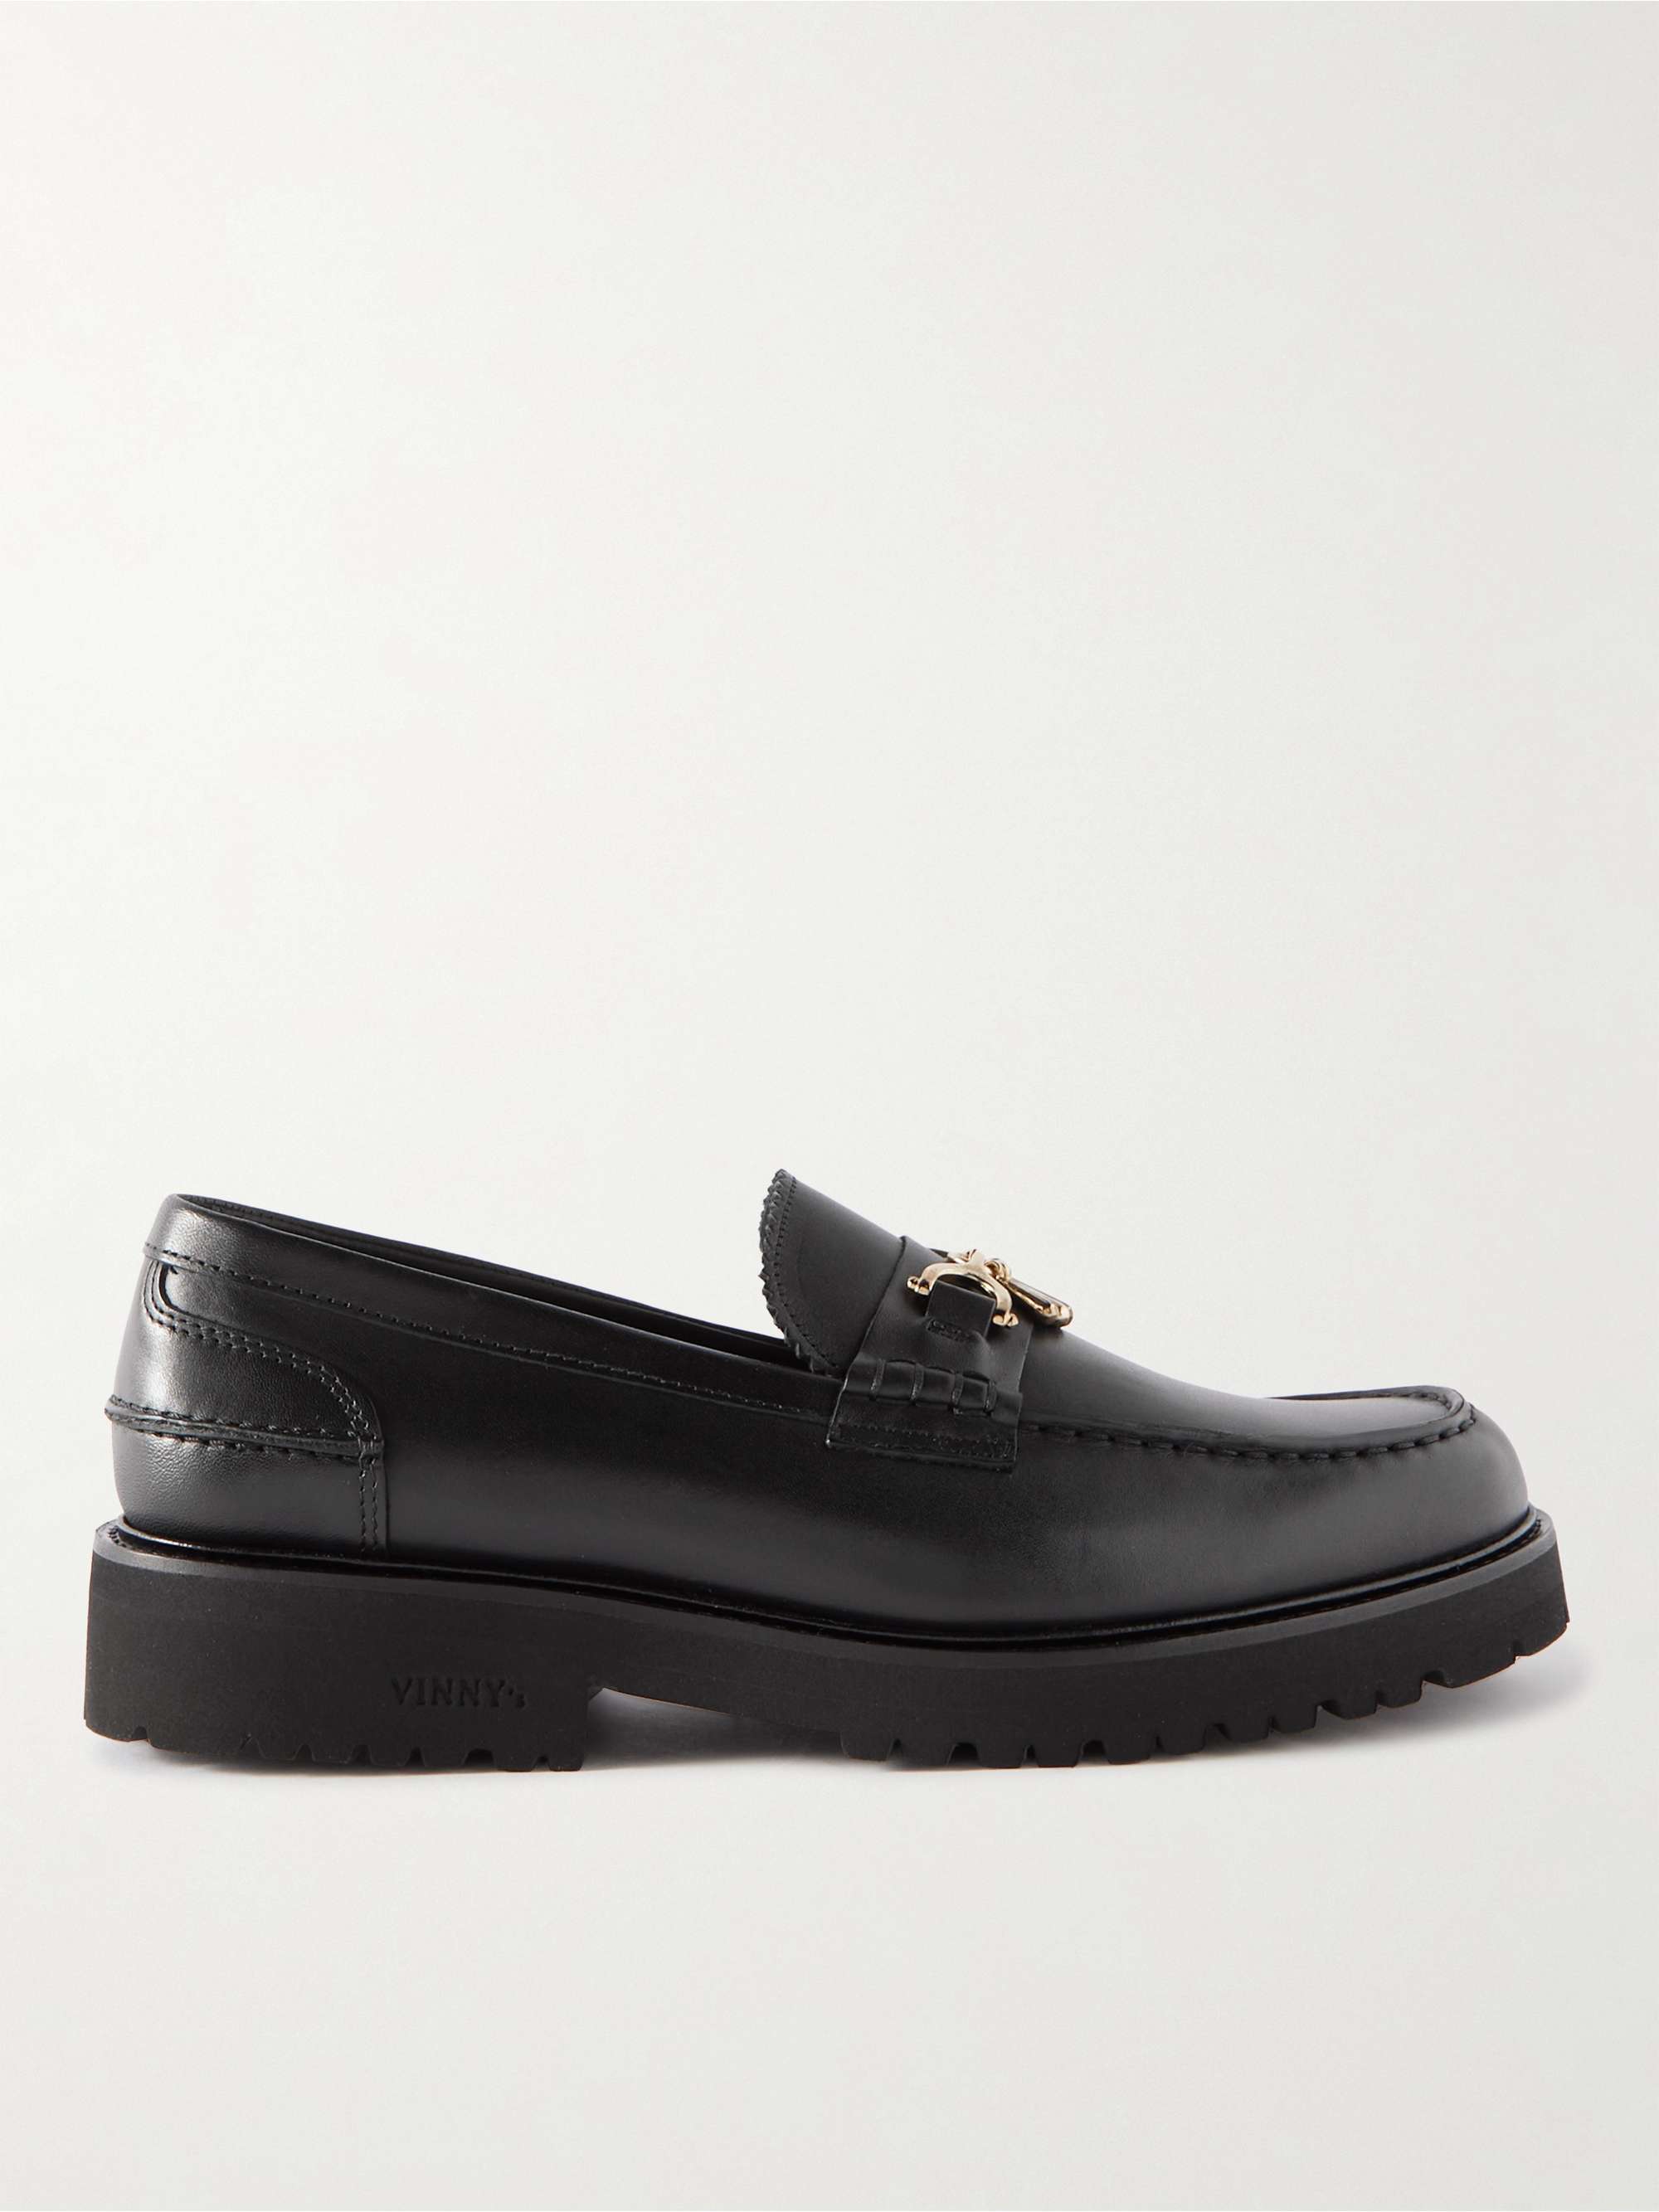 VINNY'S Palace Leather Loafers